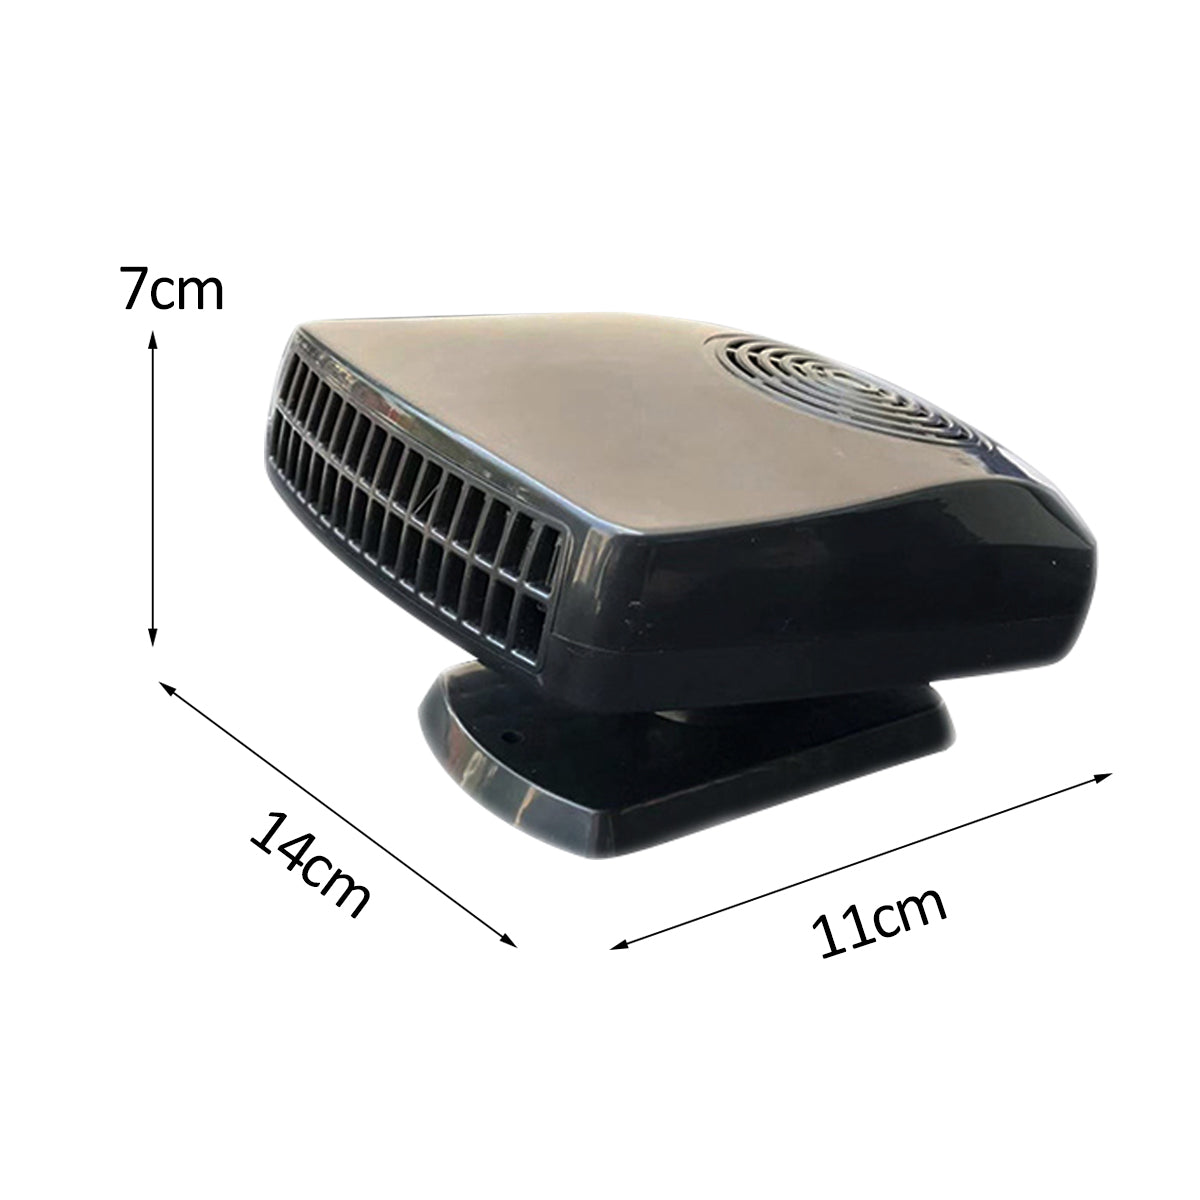 DC 12V 150W Car Heater Fan Support Hot Air And Natural Wind